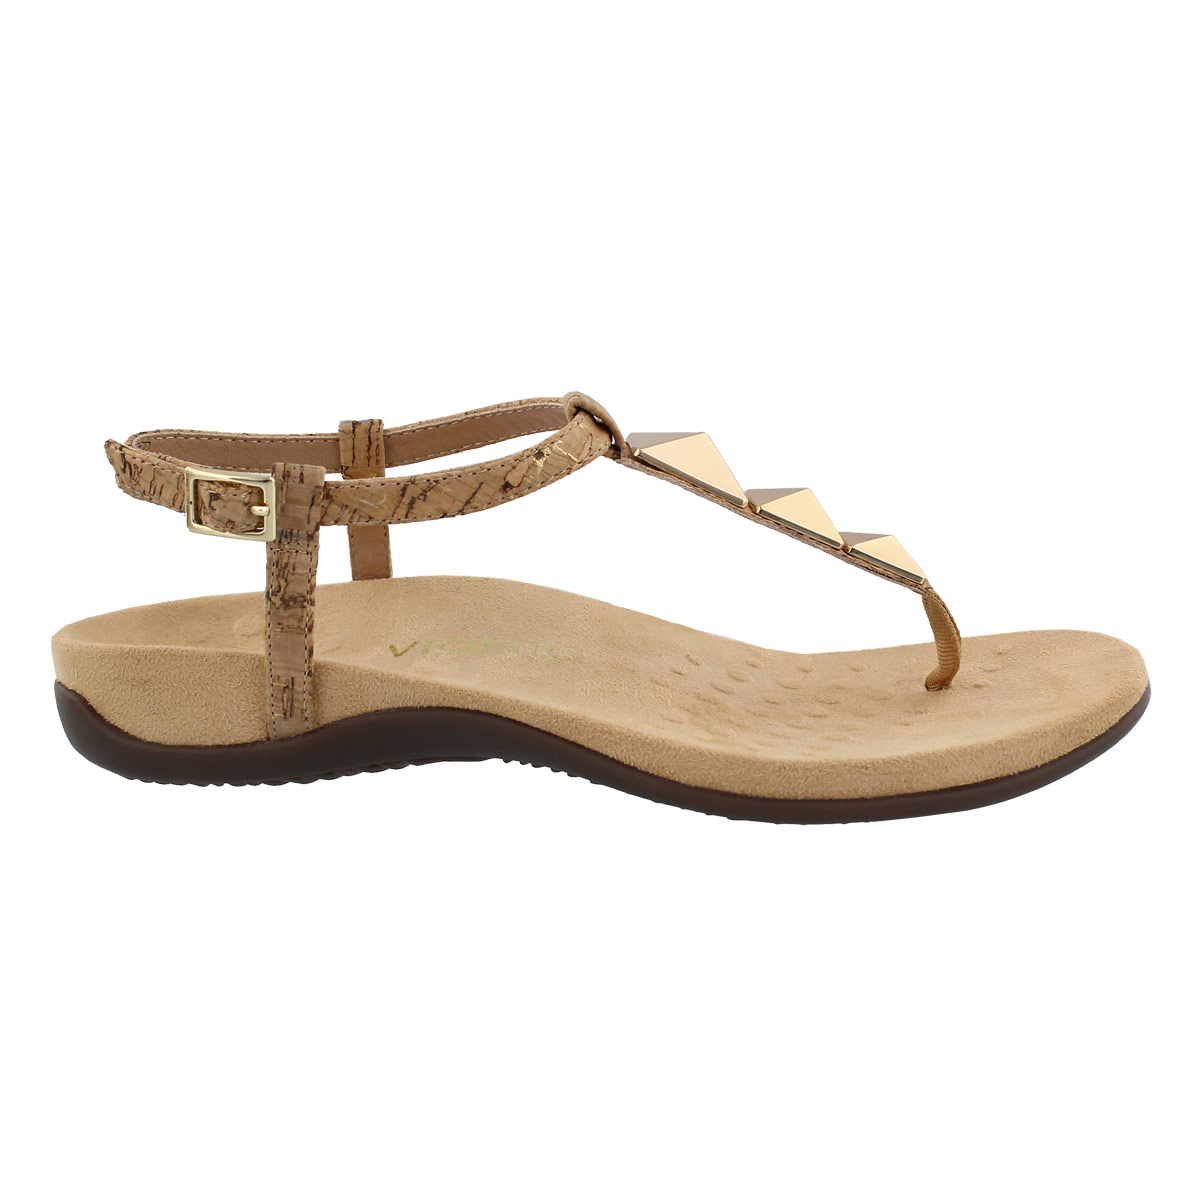 vionic arch support sandals